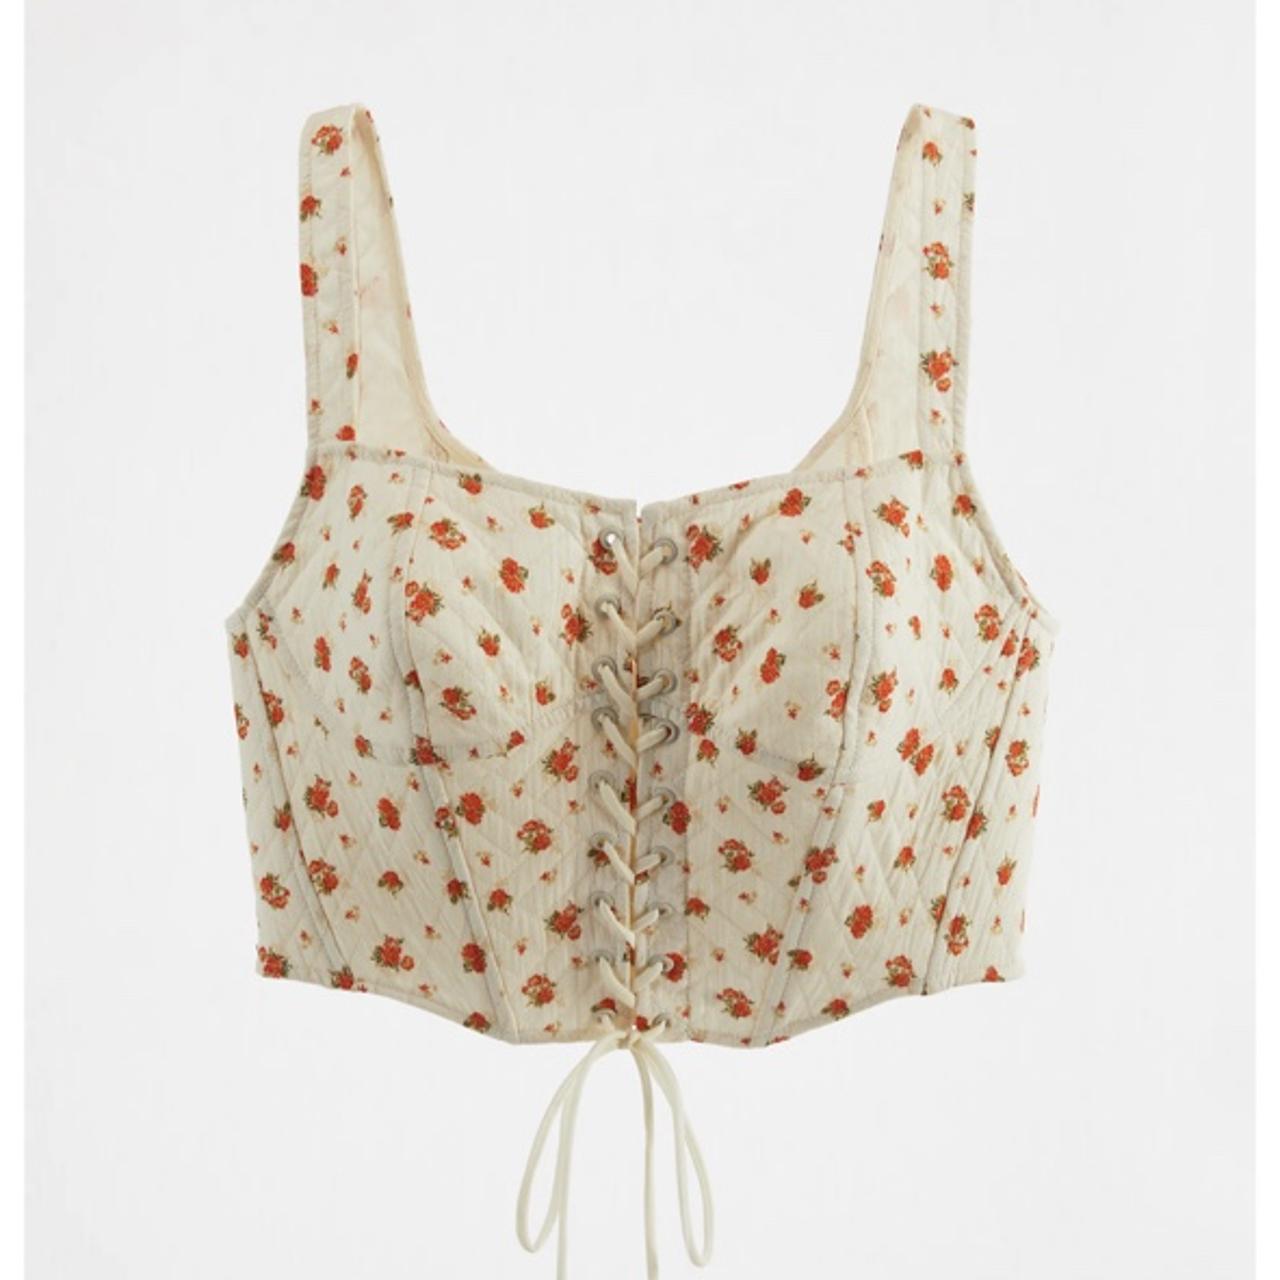 Zara floral quilted corset top , Worn once for a few